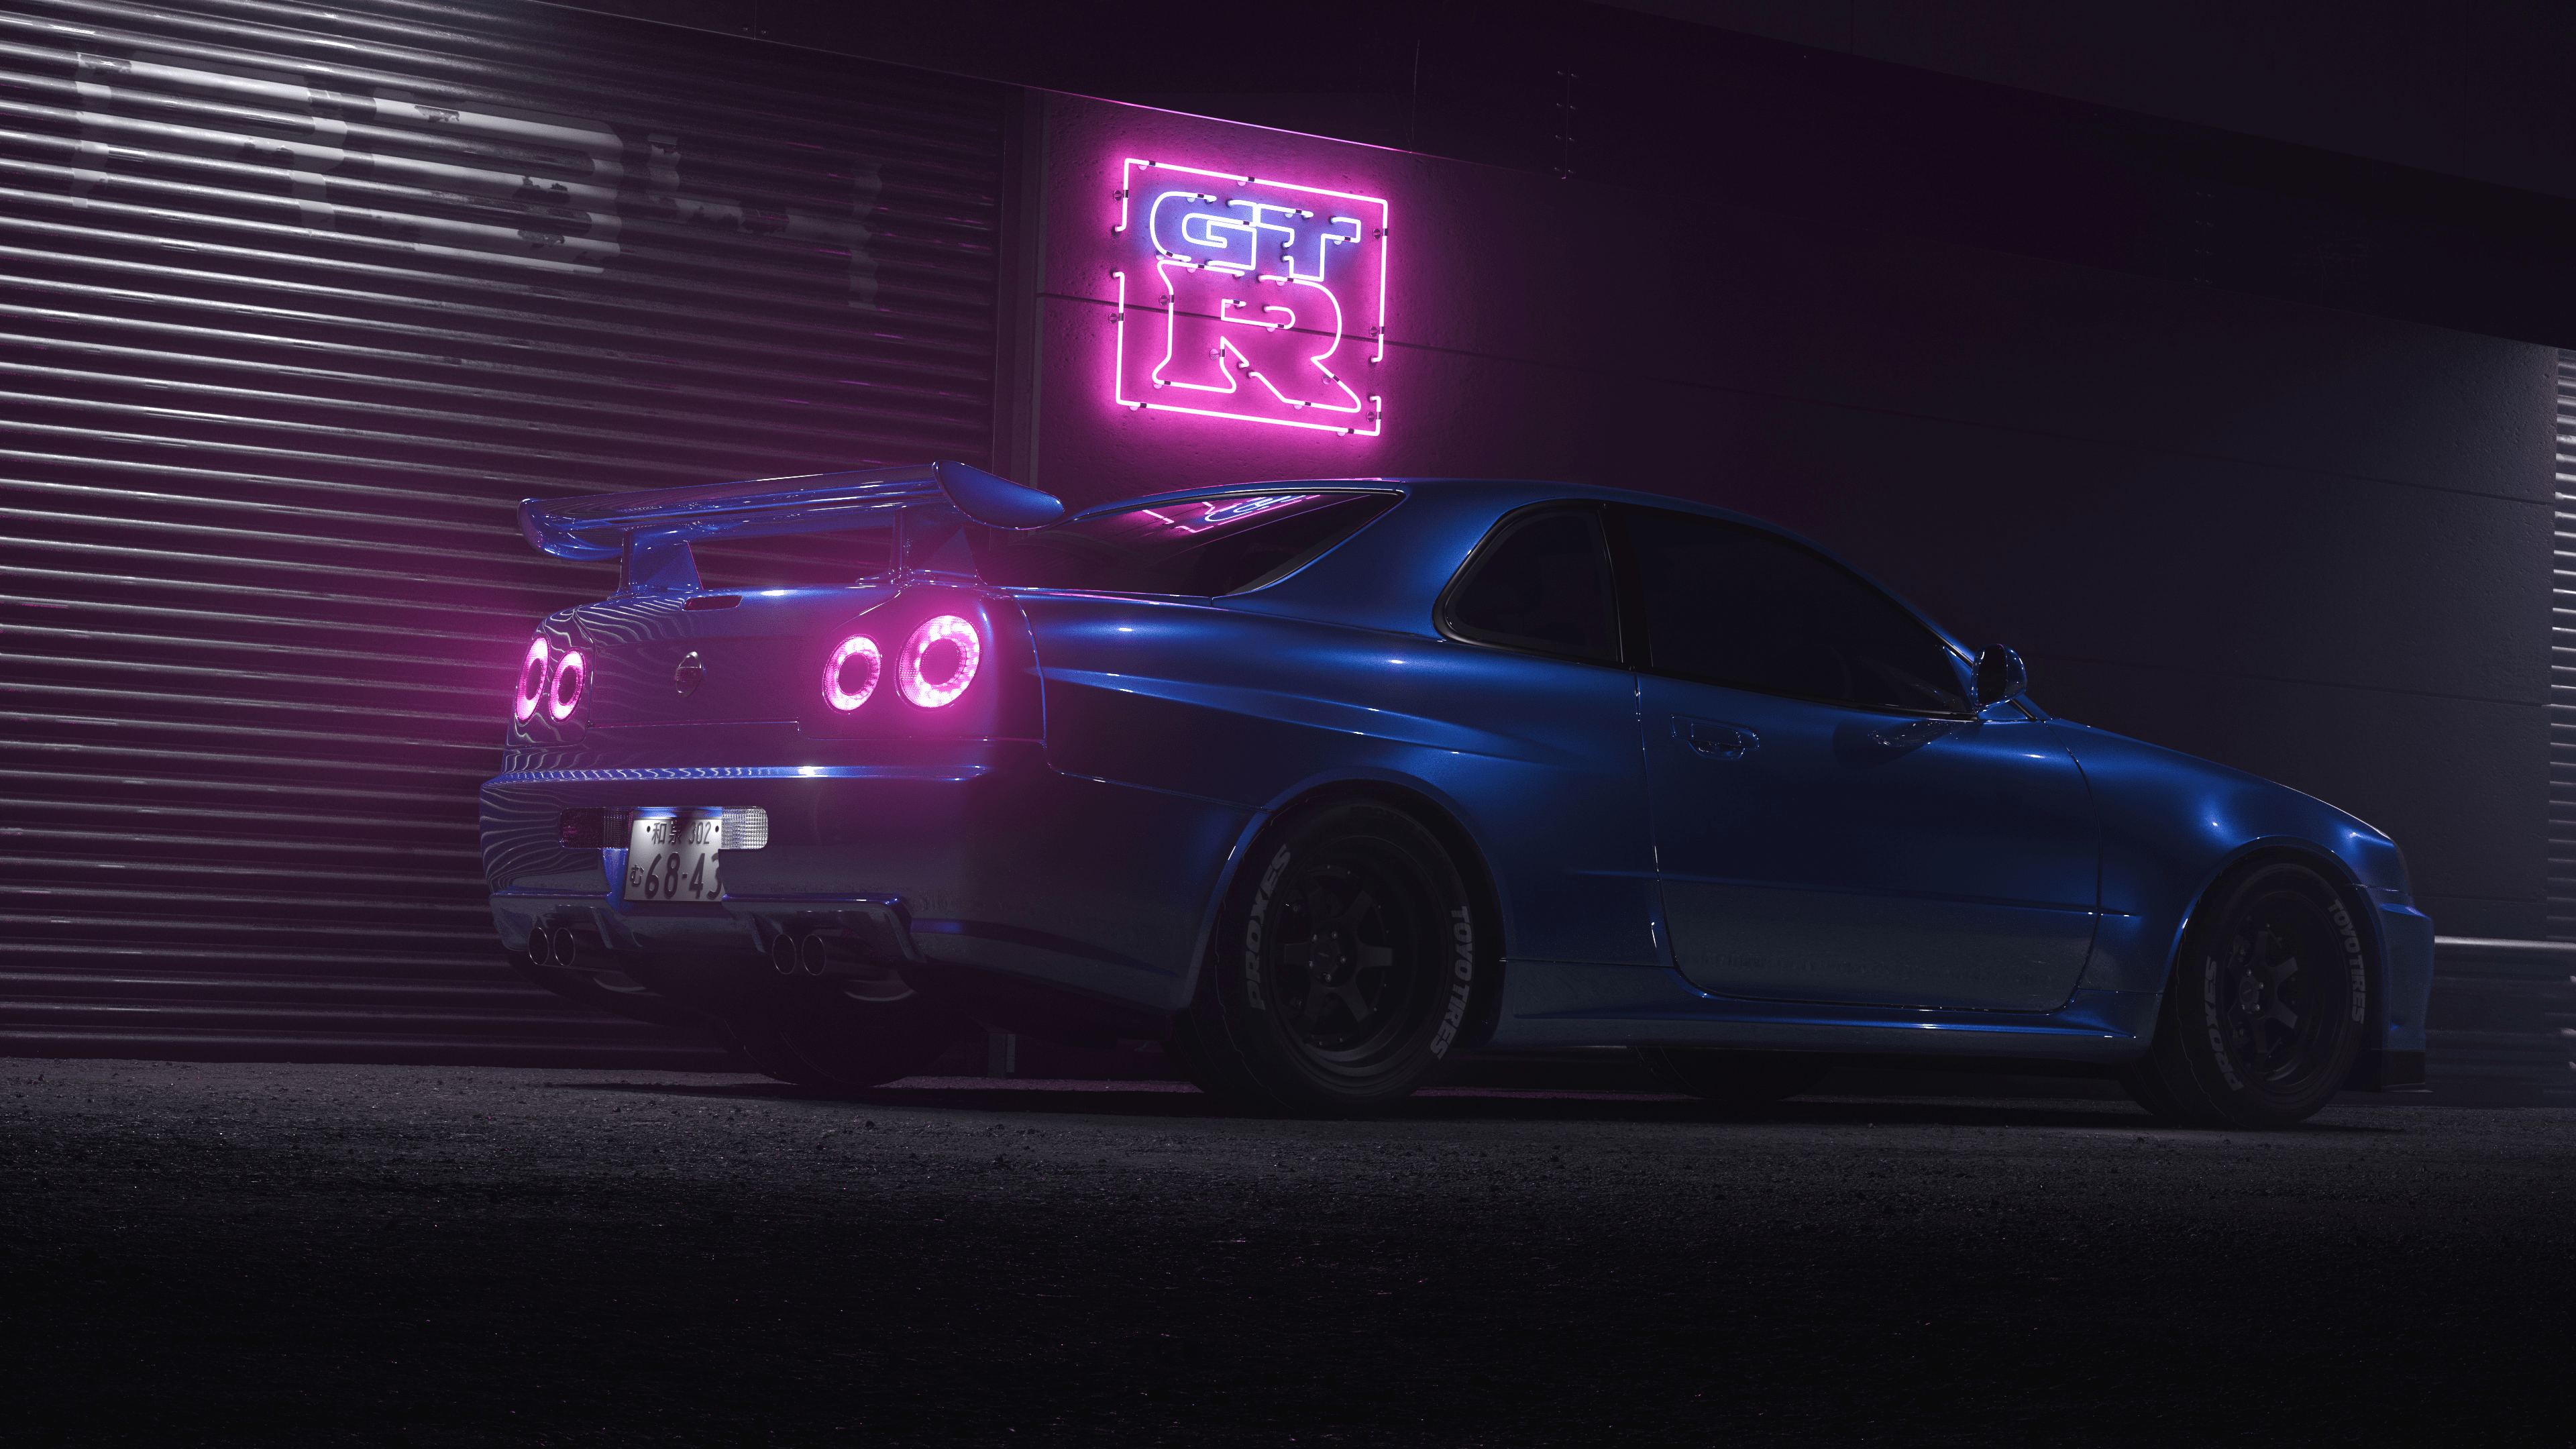 A blue car with a neon sign in the background - Nissan Skyline